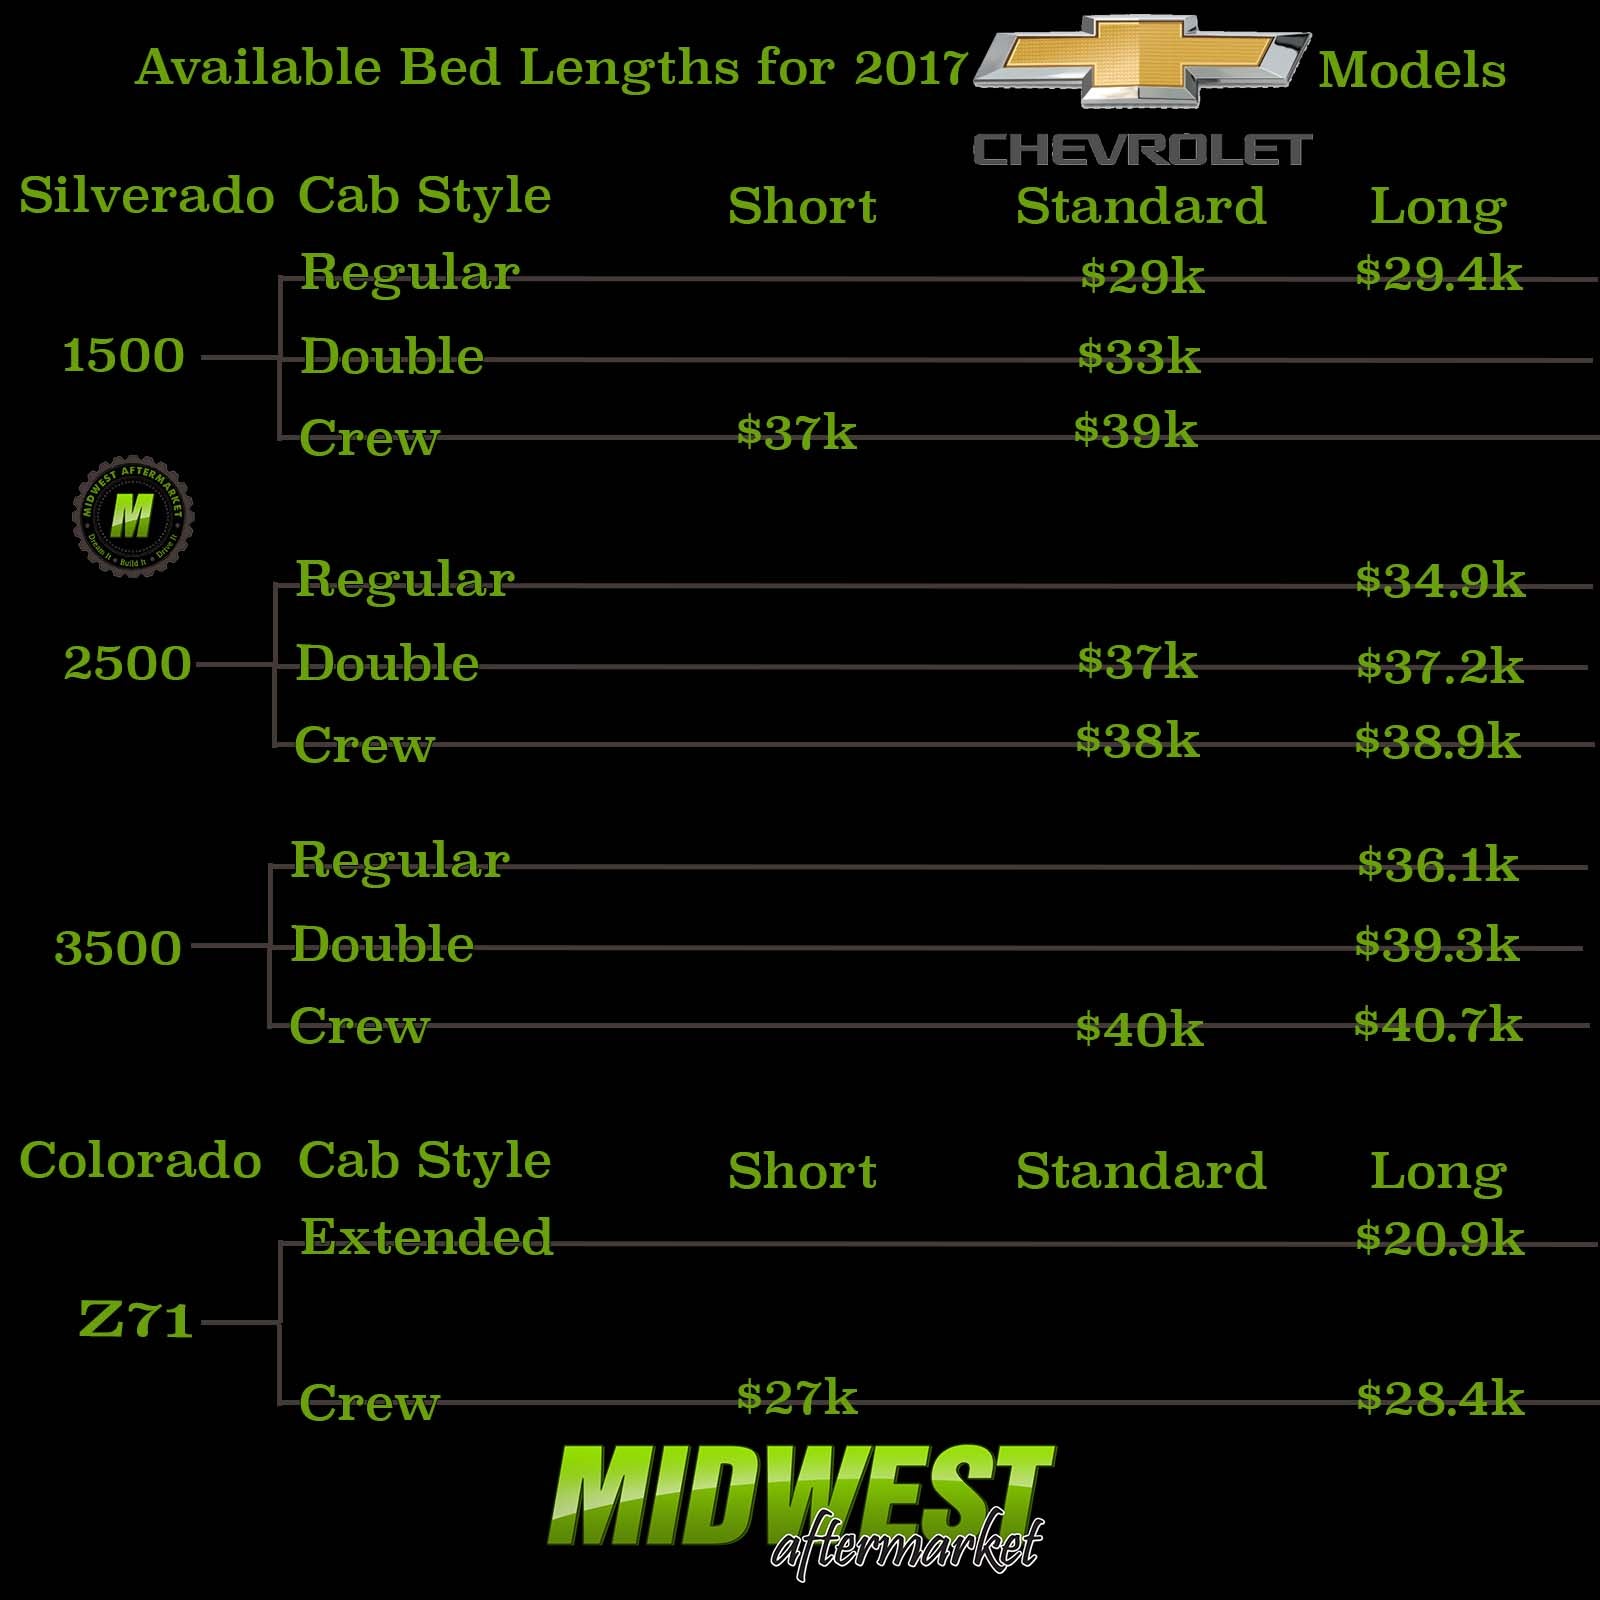 Chevy Truck Bed Lengths Available 2017 plus MSRP chart